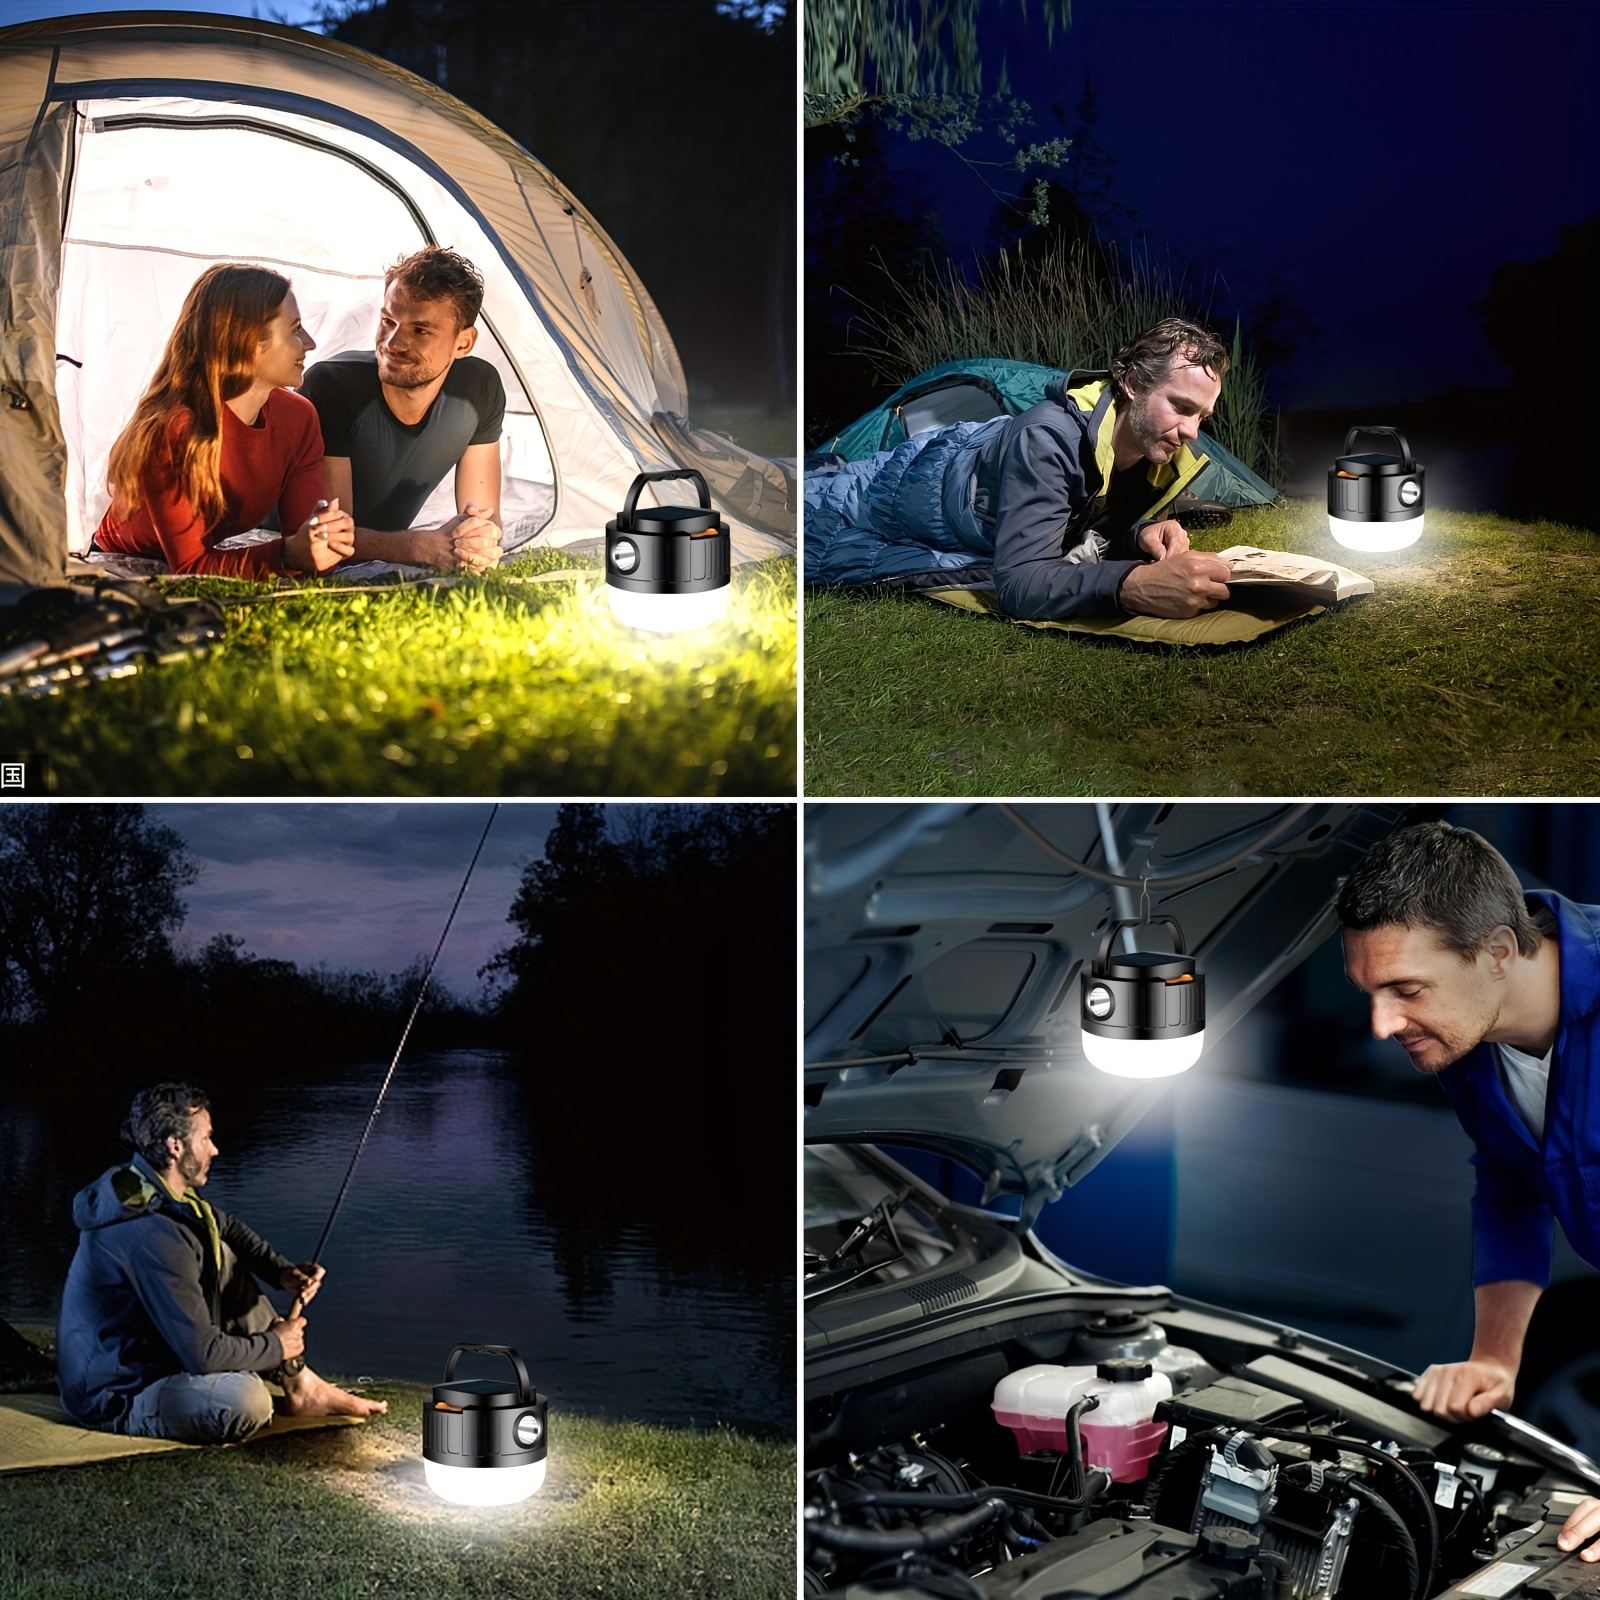 Outdoor Solar LED Camping Lights USB Rechargeable Tent Portable